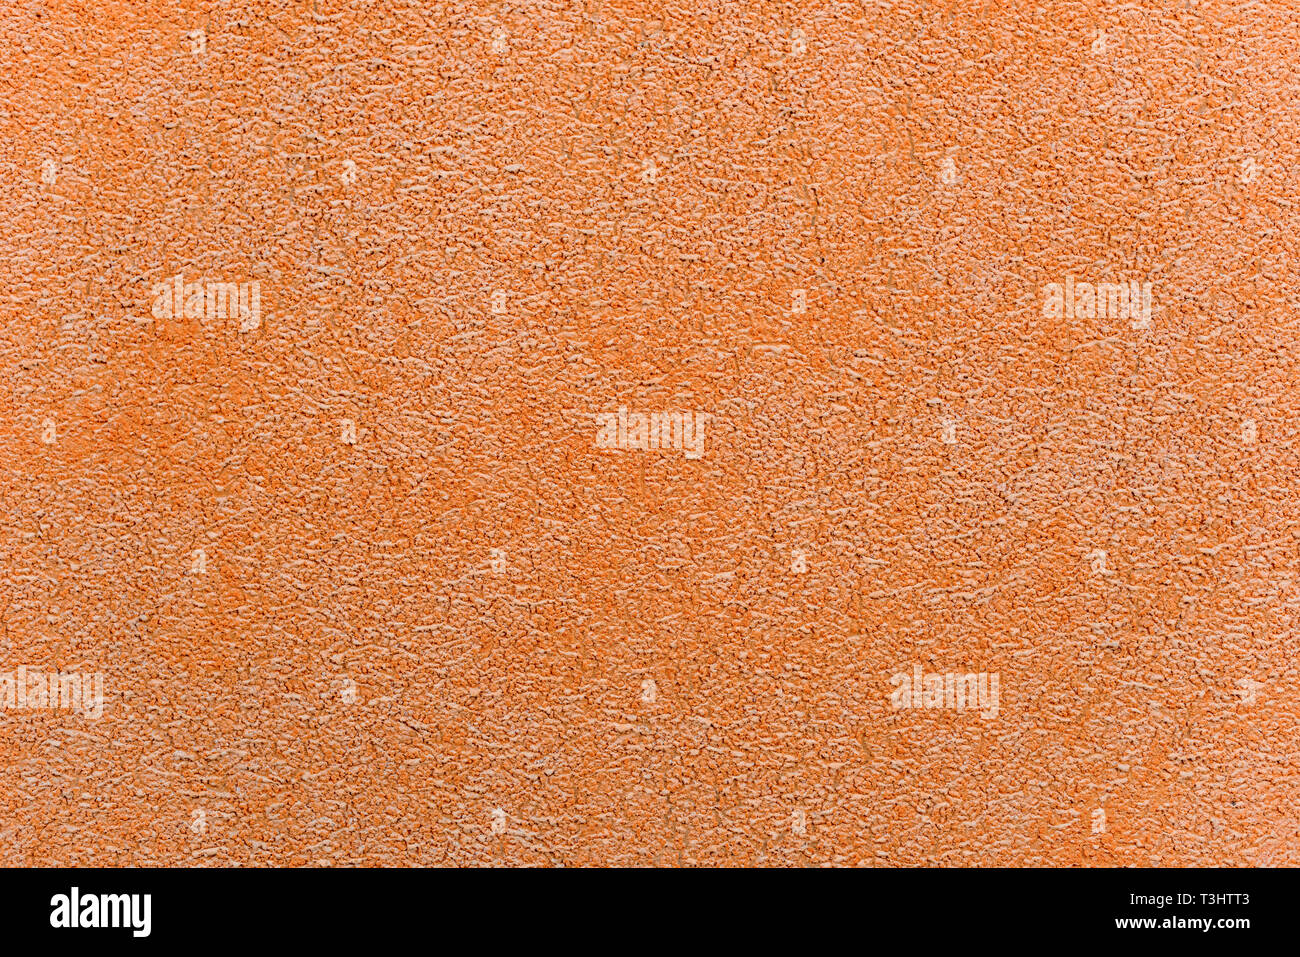 Exterior wall texture paint surface as background Stock Photo